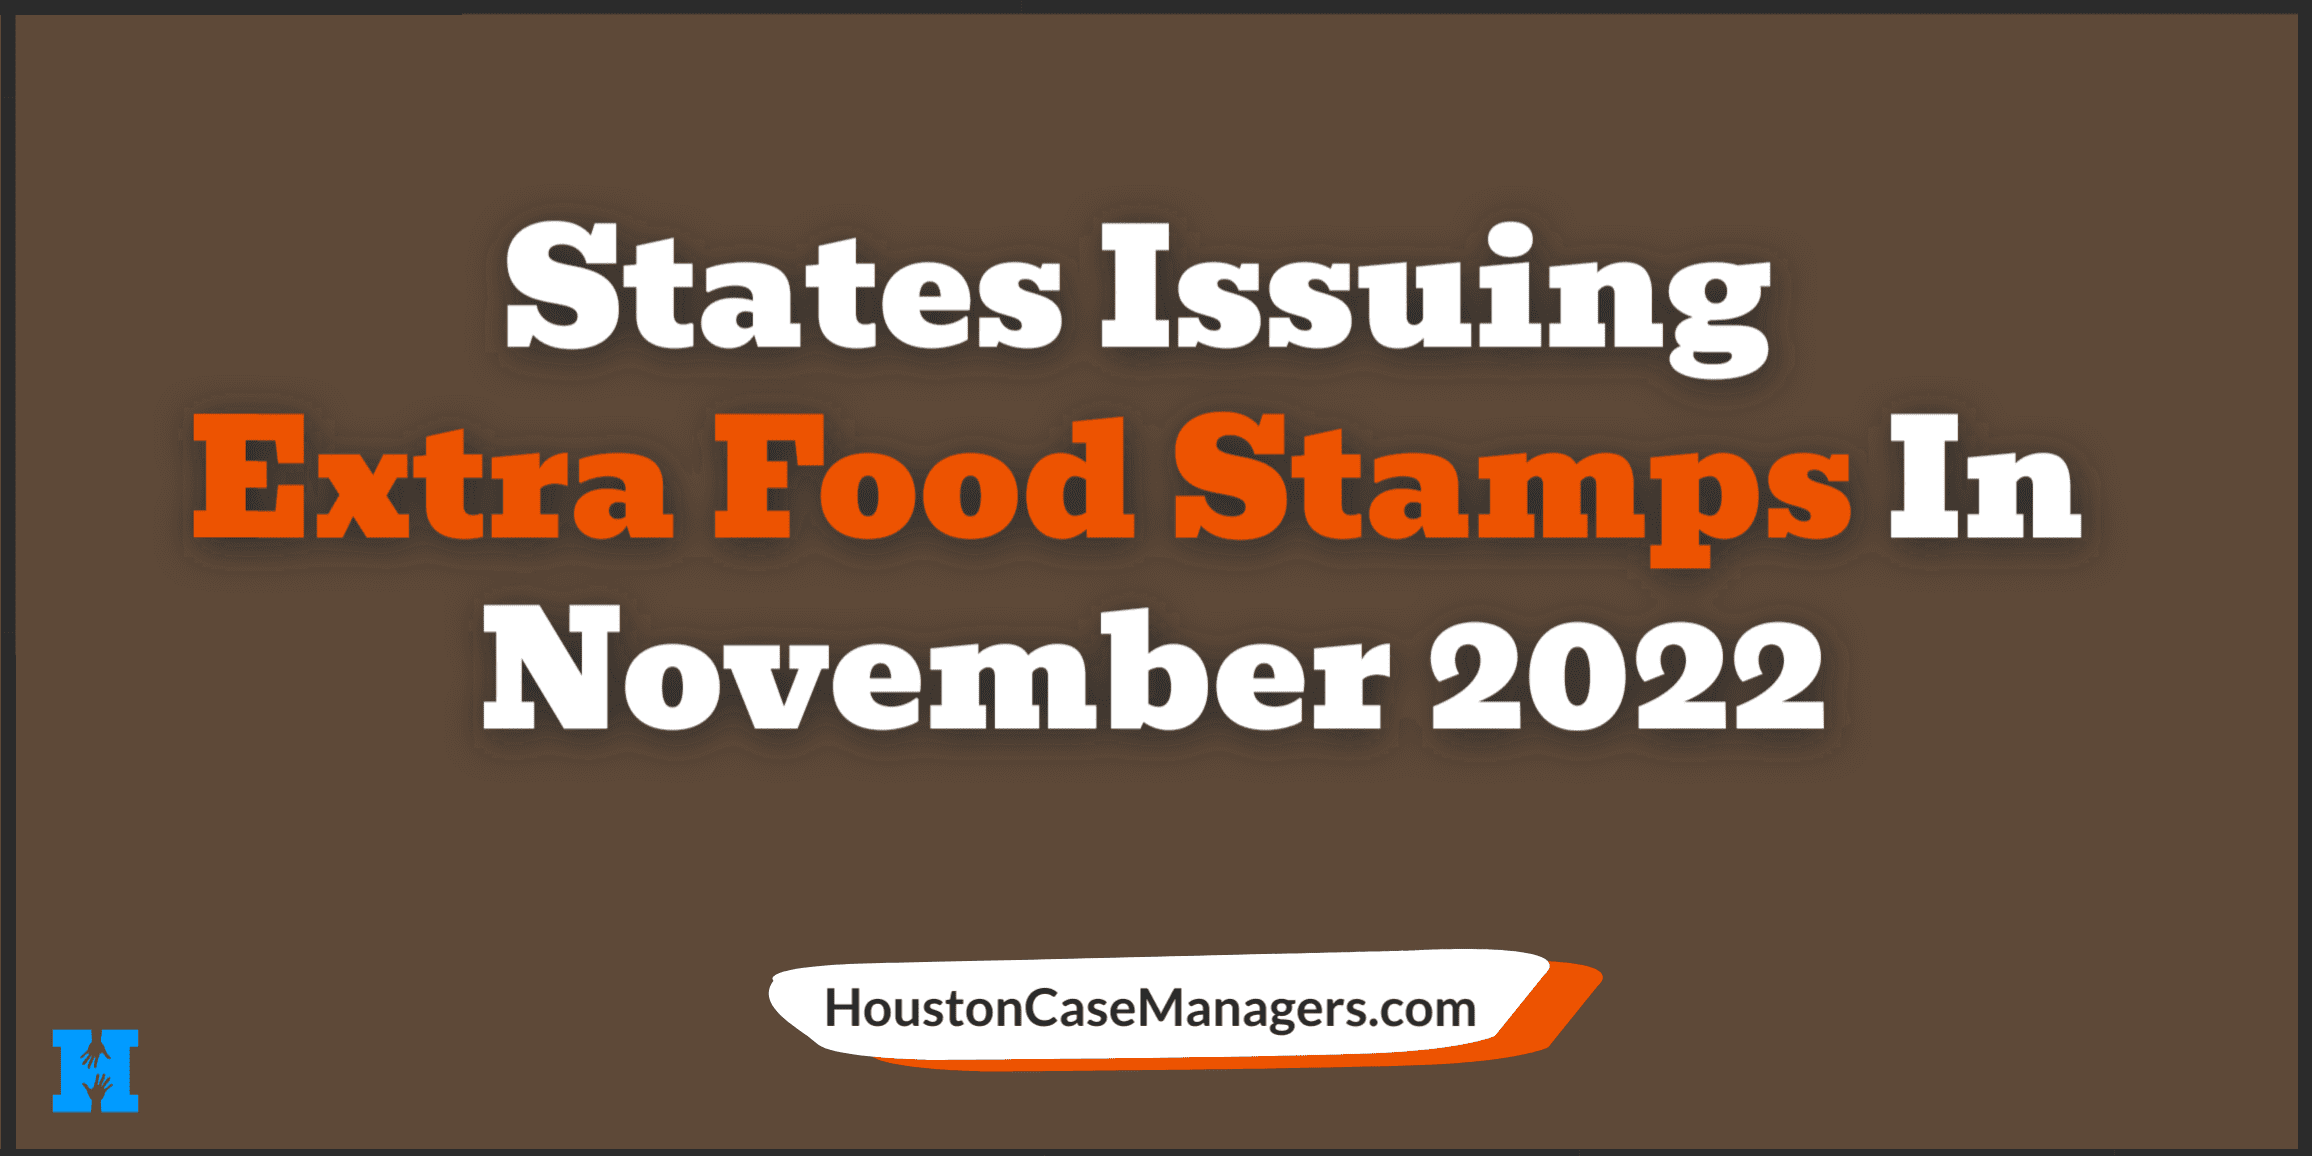 21 States Issuing Extra Food Stamps In November 2022 (so far)